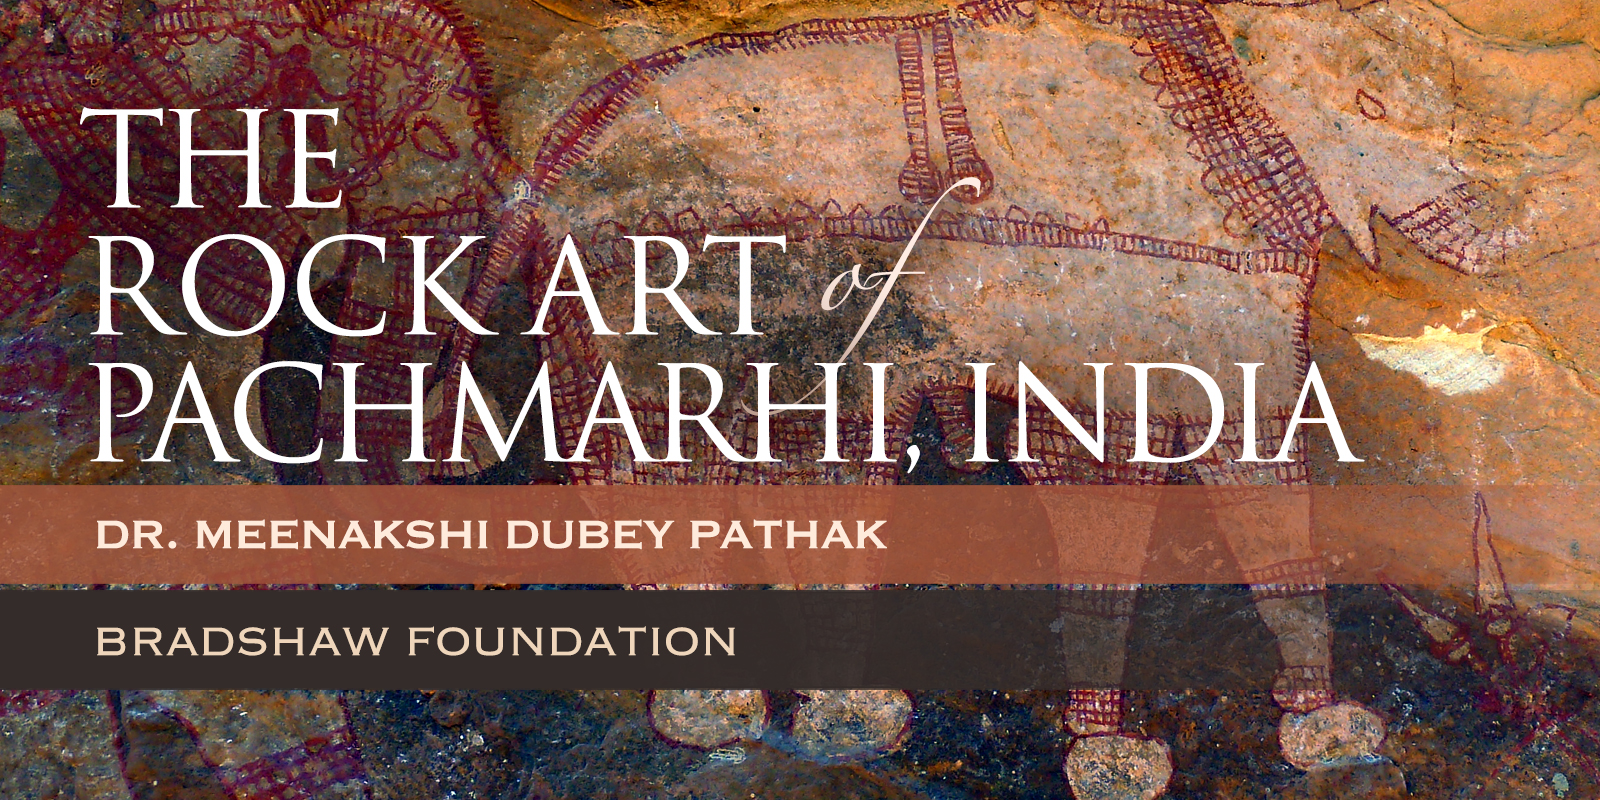 The Prehistoric Paintings of the Pachmarhi Hills